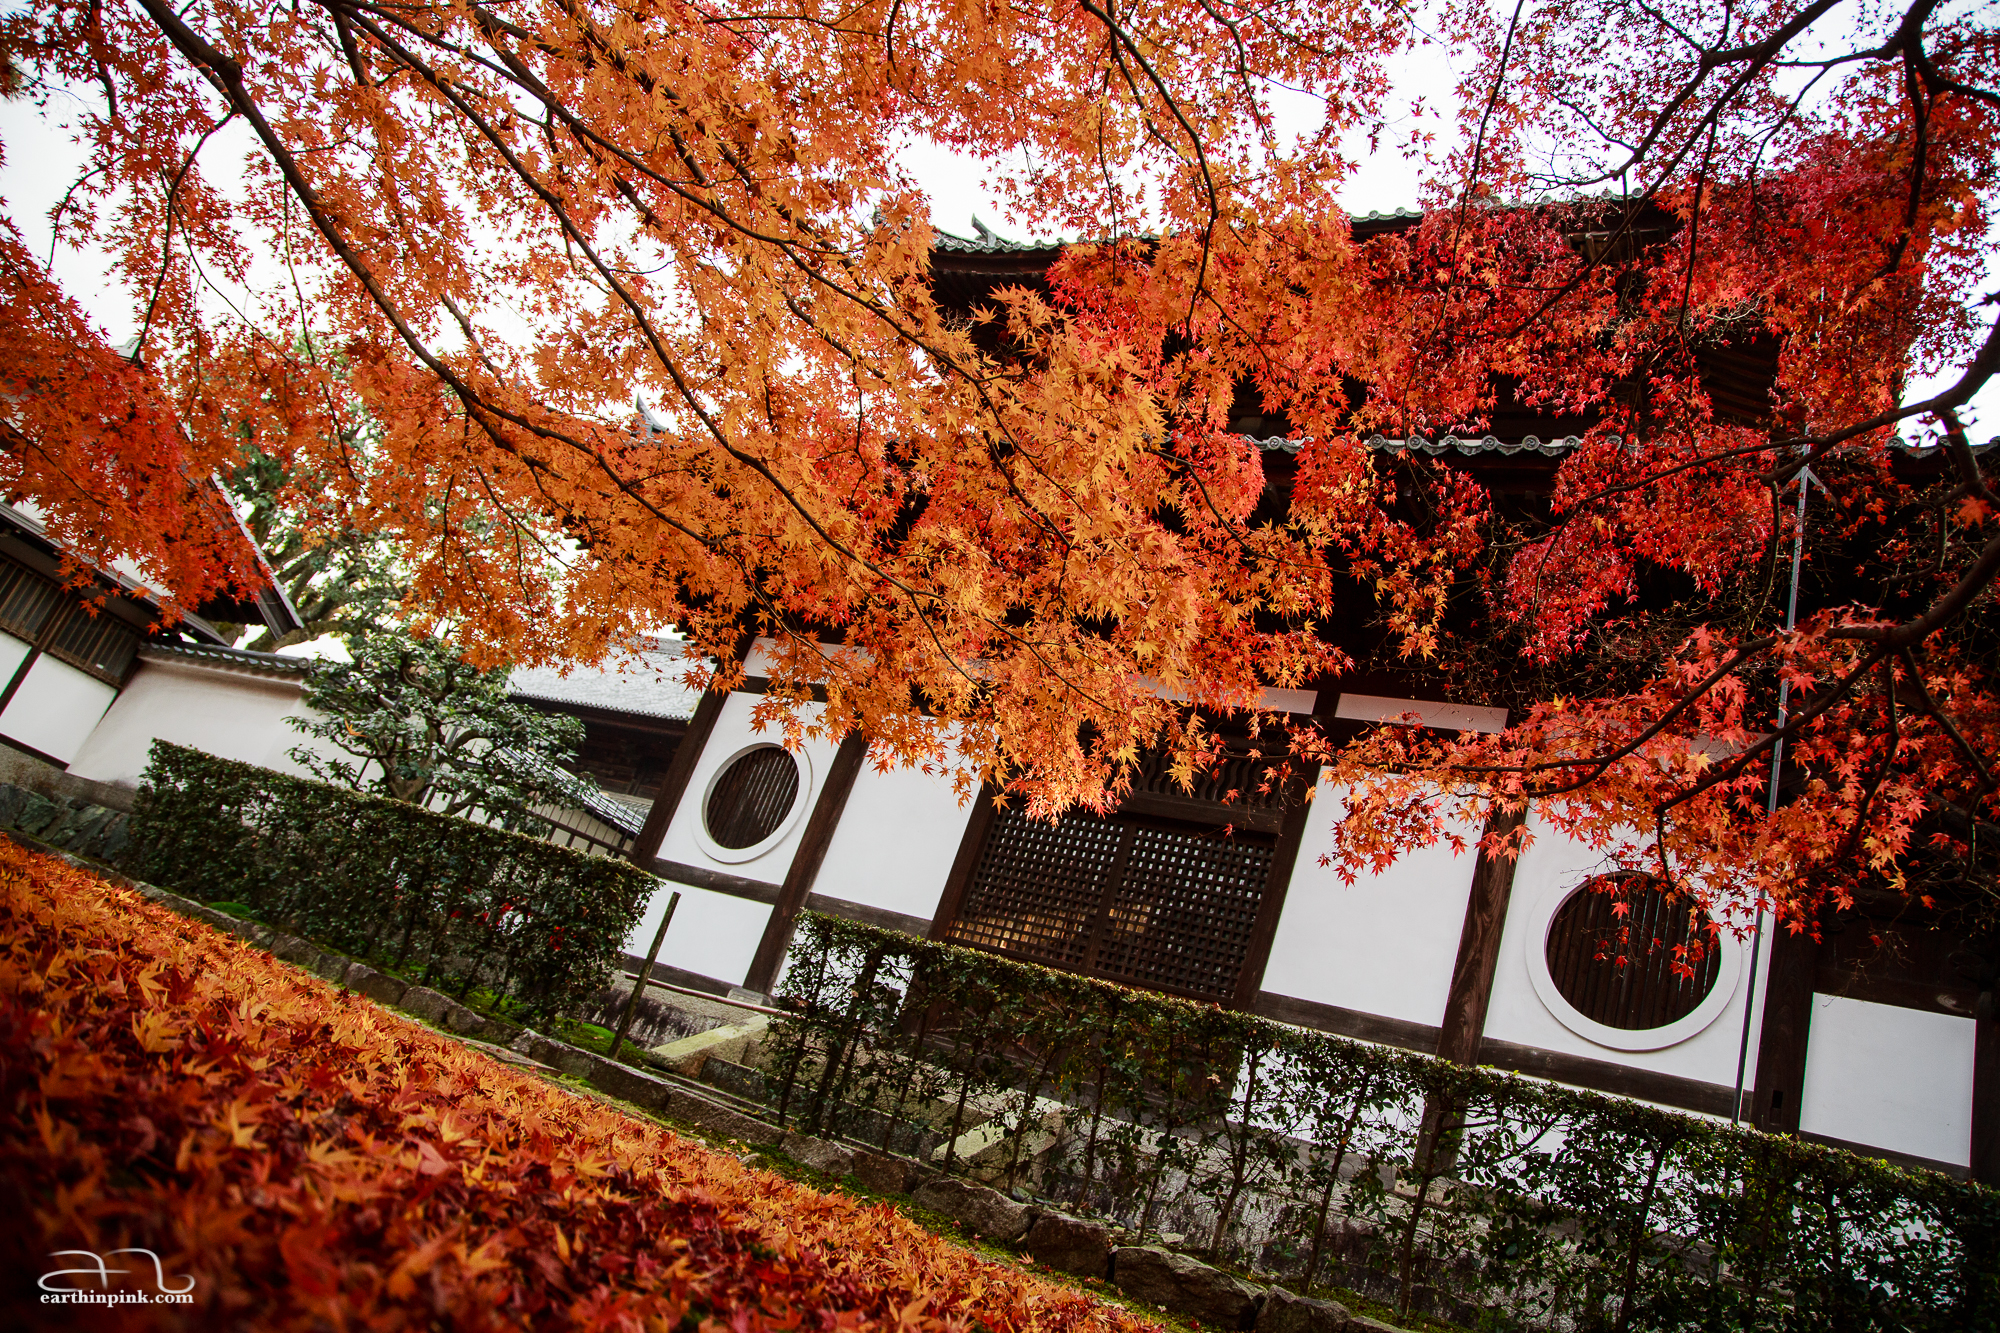 A small traditional building on the grounds of the Tofukuji temple, framed by autumn-coloured leaves.